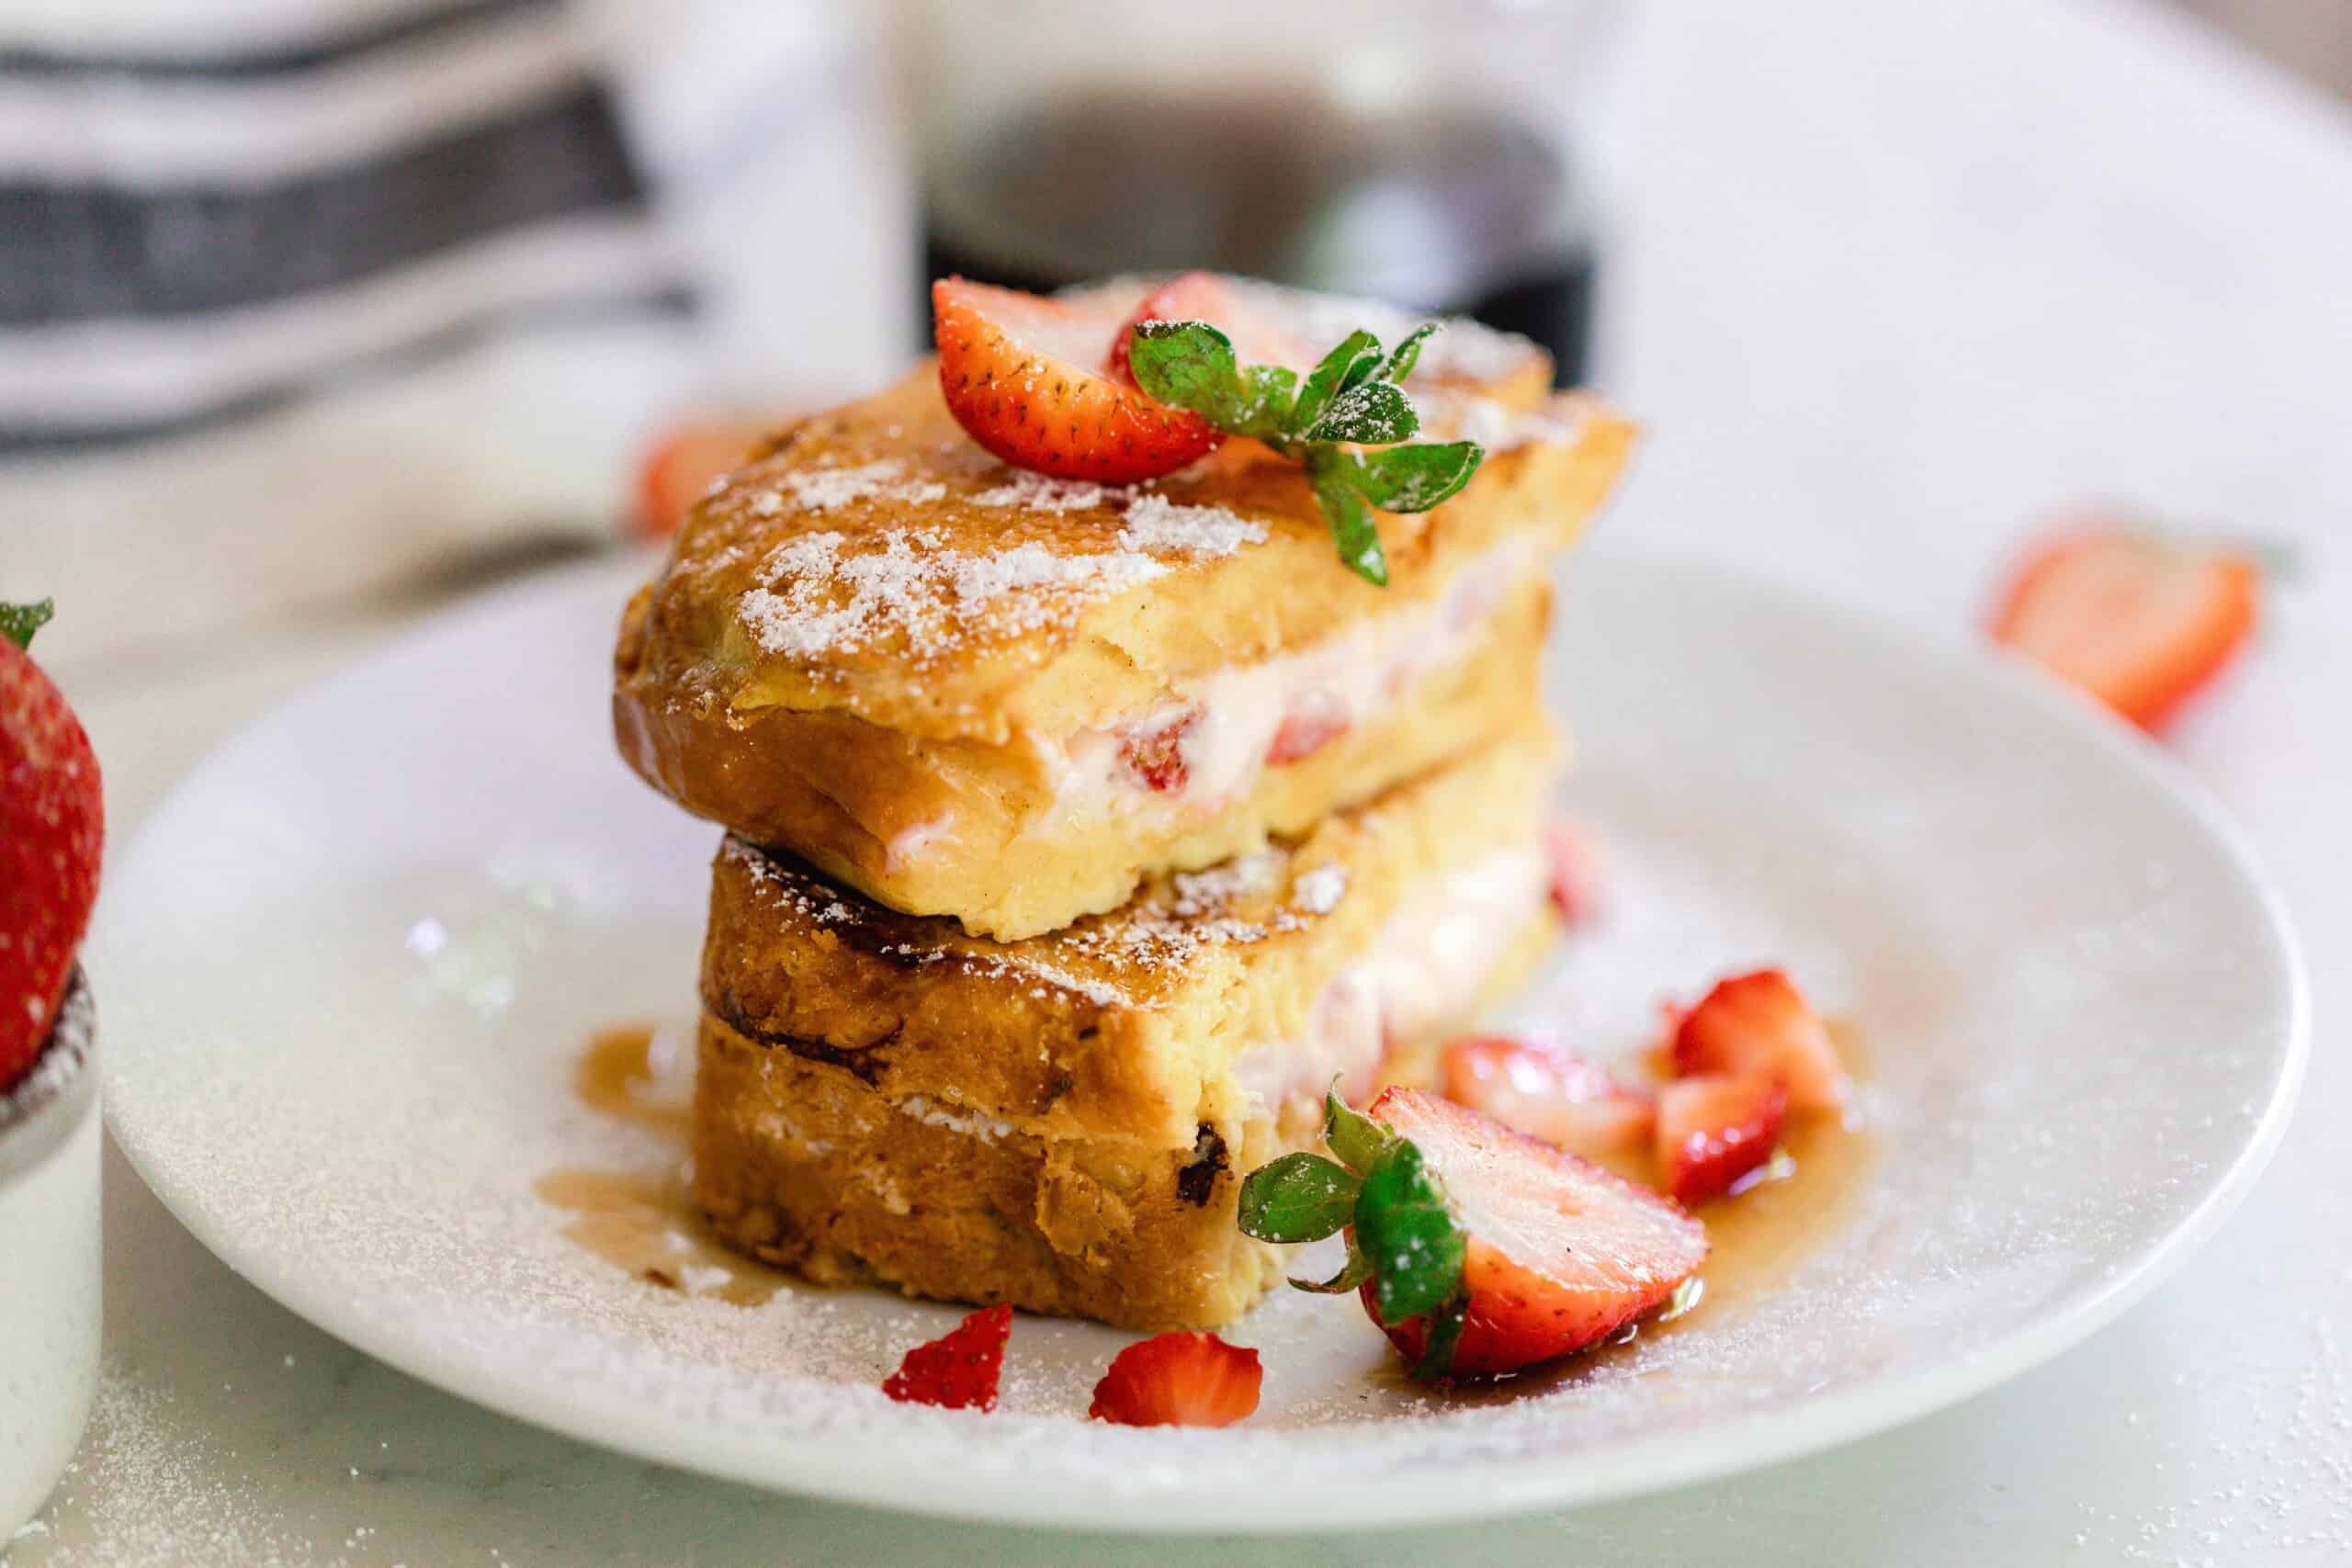 Strawberry stuffed French toast sliced in half and stacked on top of each other topped with powdered sugar and fresh strawberries on a white plate